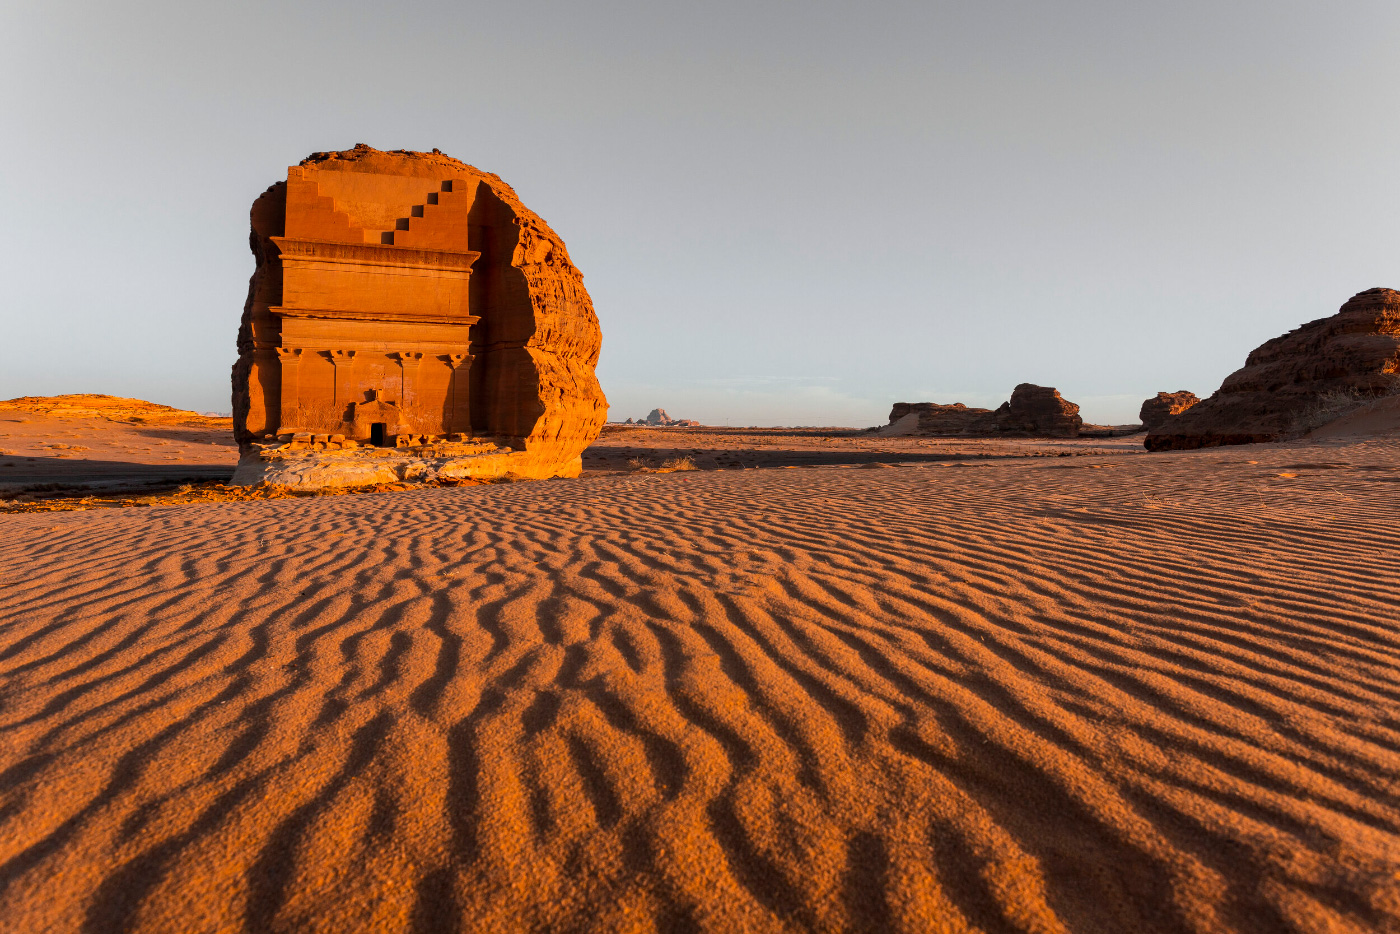 A large facade carved out of a giant boulder in the desert.